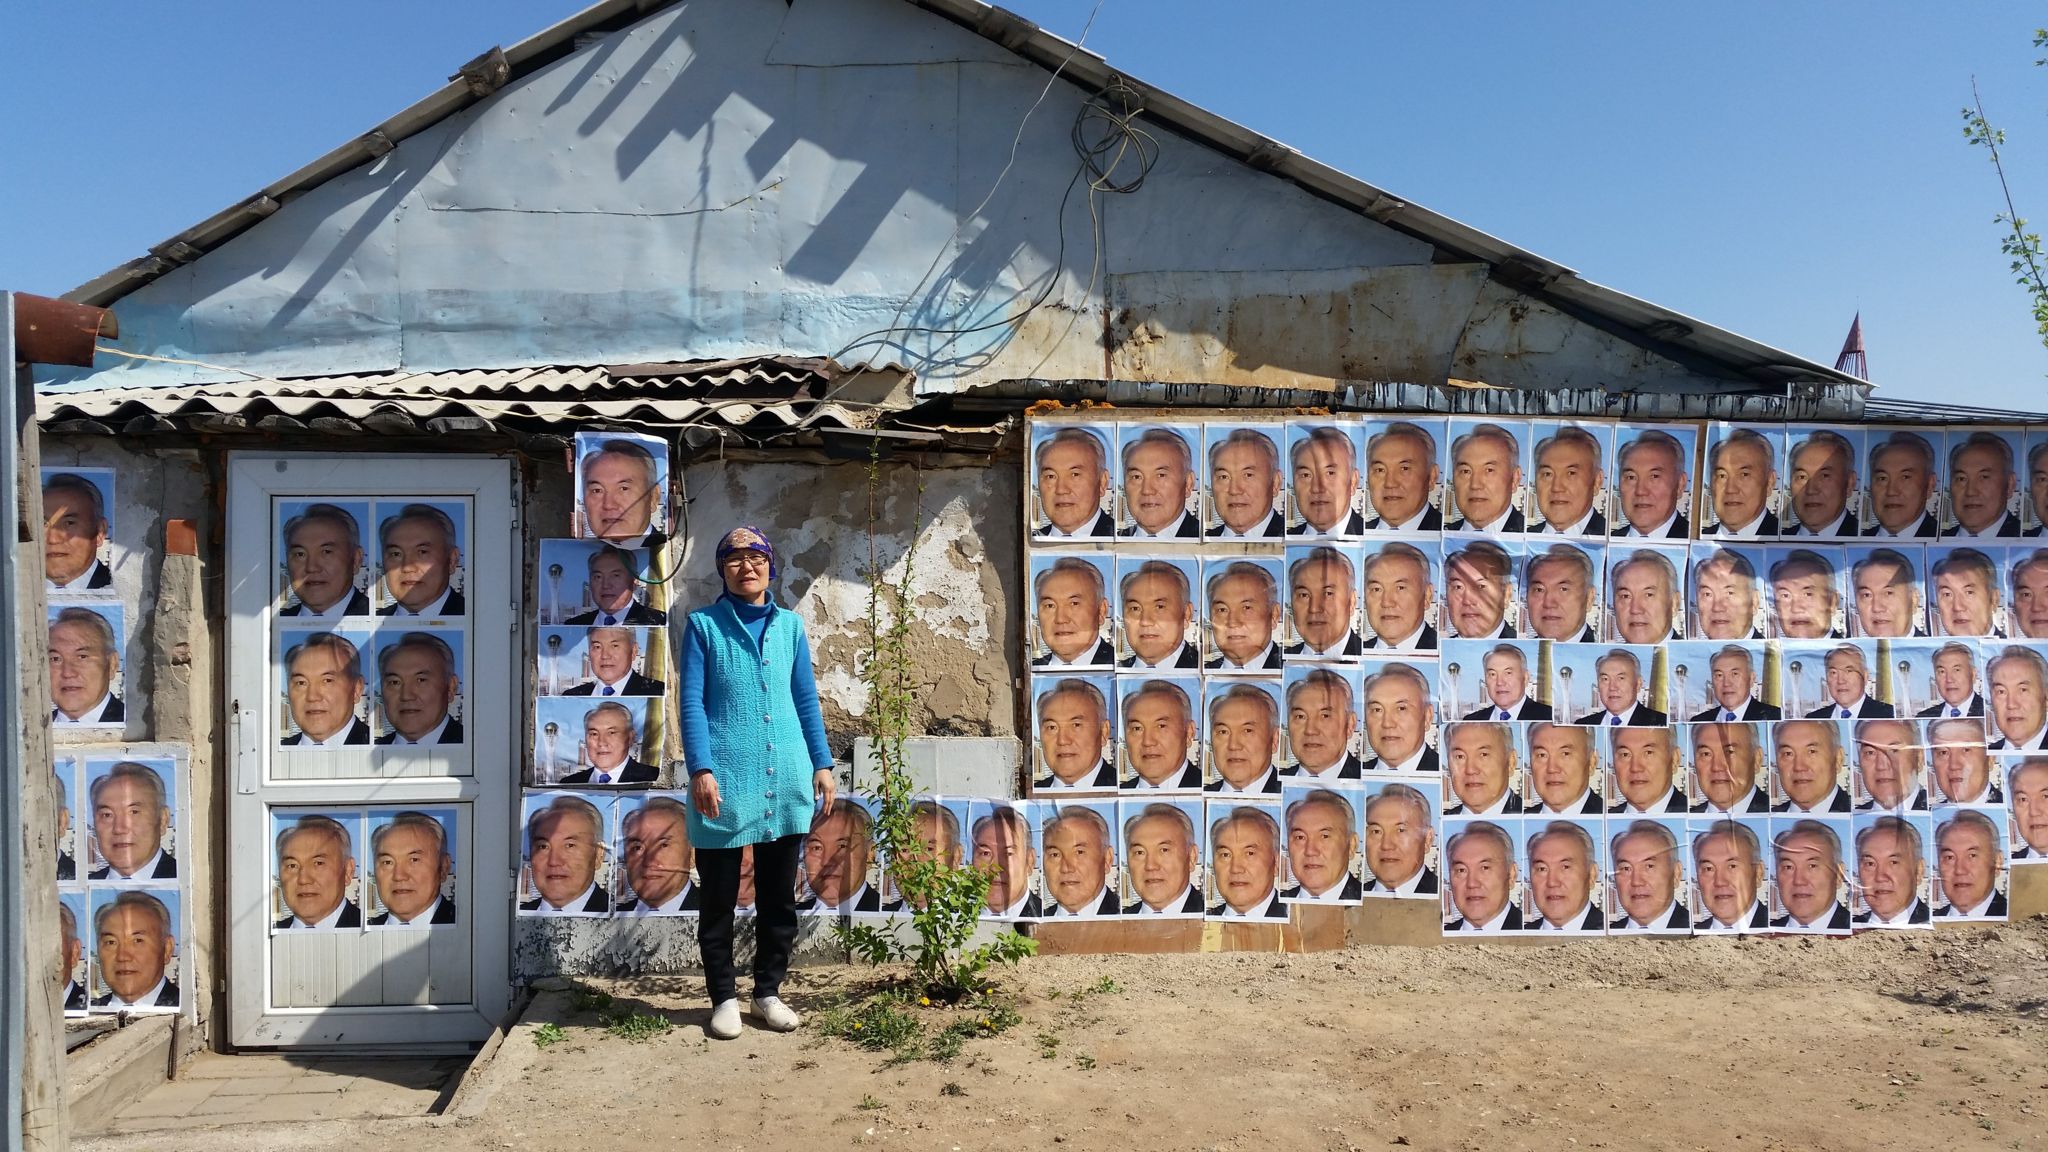 A woman in Astana, Kazakhstan has plastered the outside walls of her house with images of President Nursultan Nazarbayev to stop it from being demolished